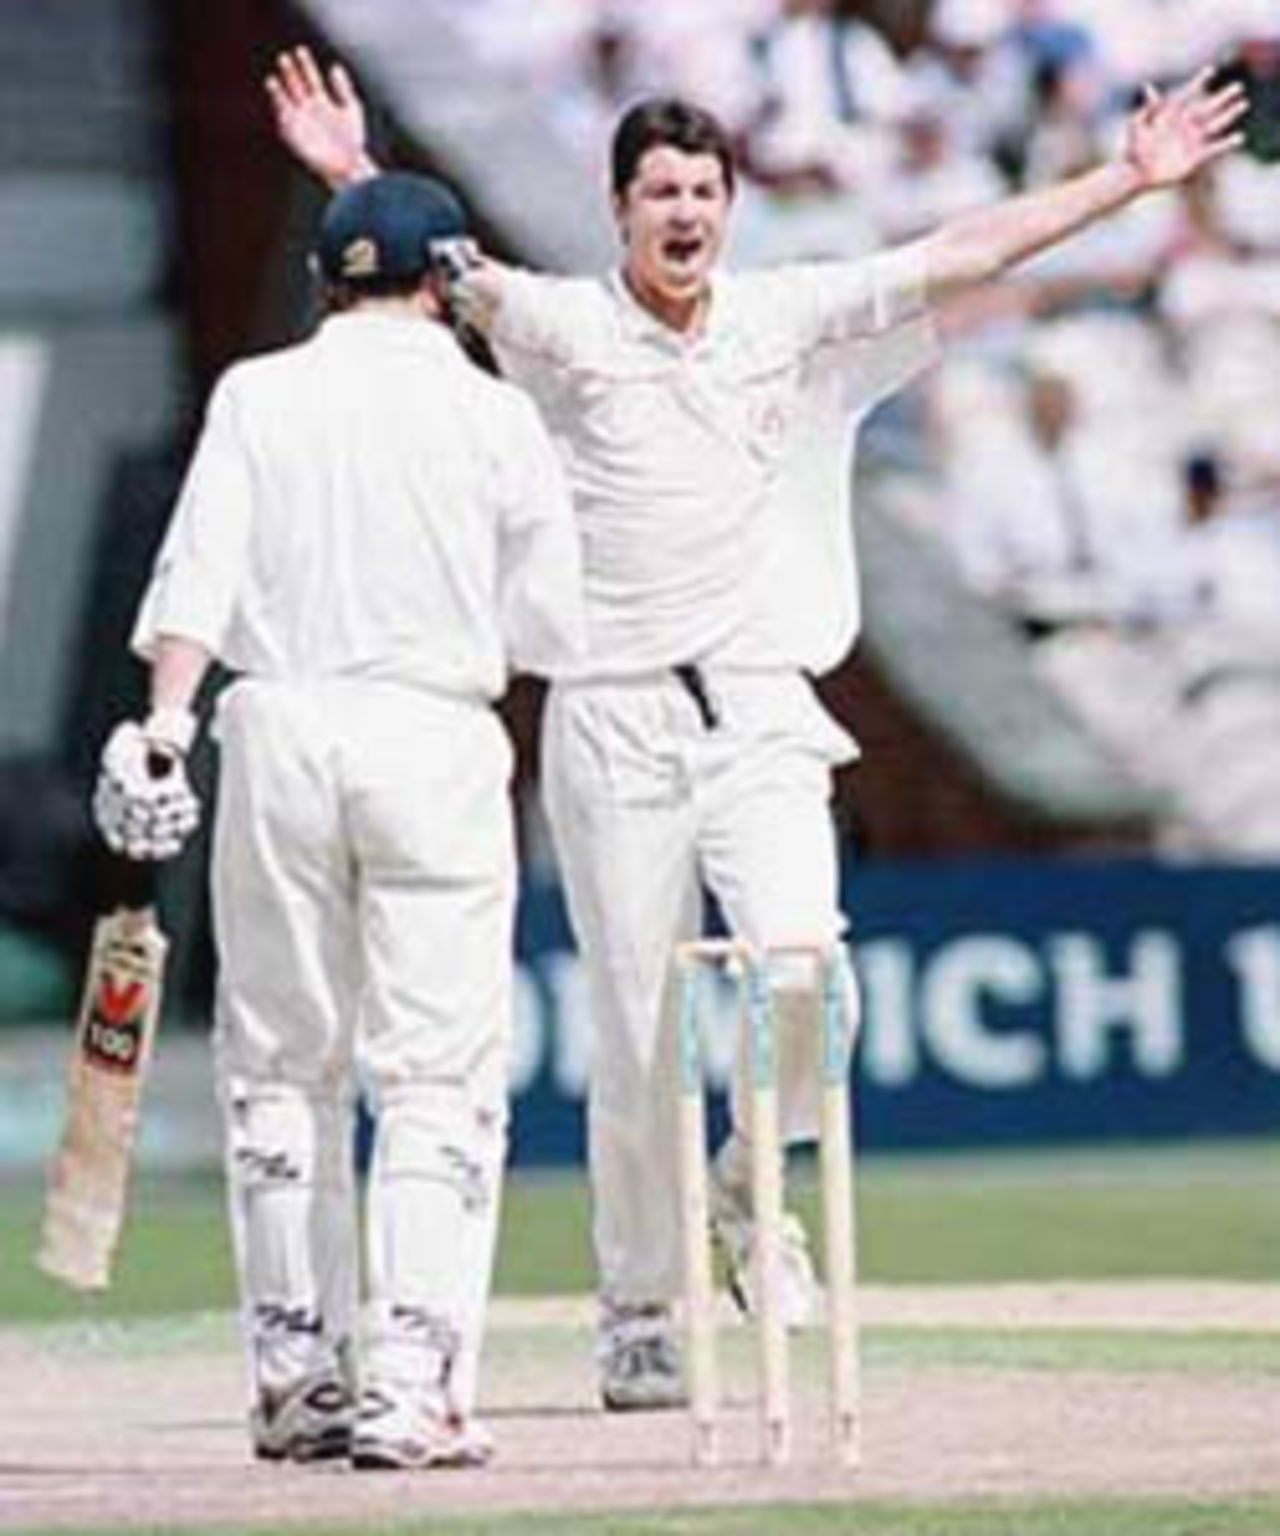 Smethurst throws his arms up in celebration of trapping Collingwood leg before, PPP healthcare County Championship Division One, 2000, Lancashire v Durham, Old Trafford, Manchester 19-22 July 2000 (Day 1).